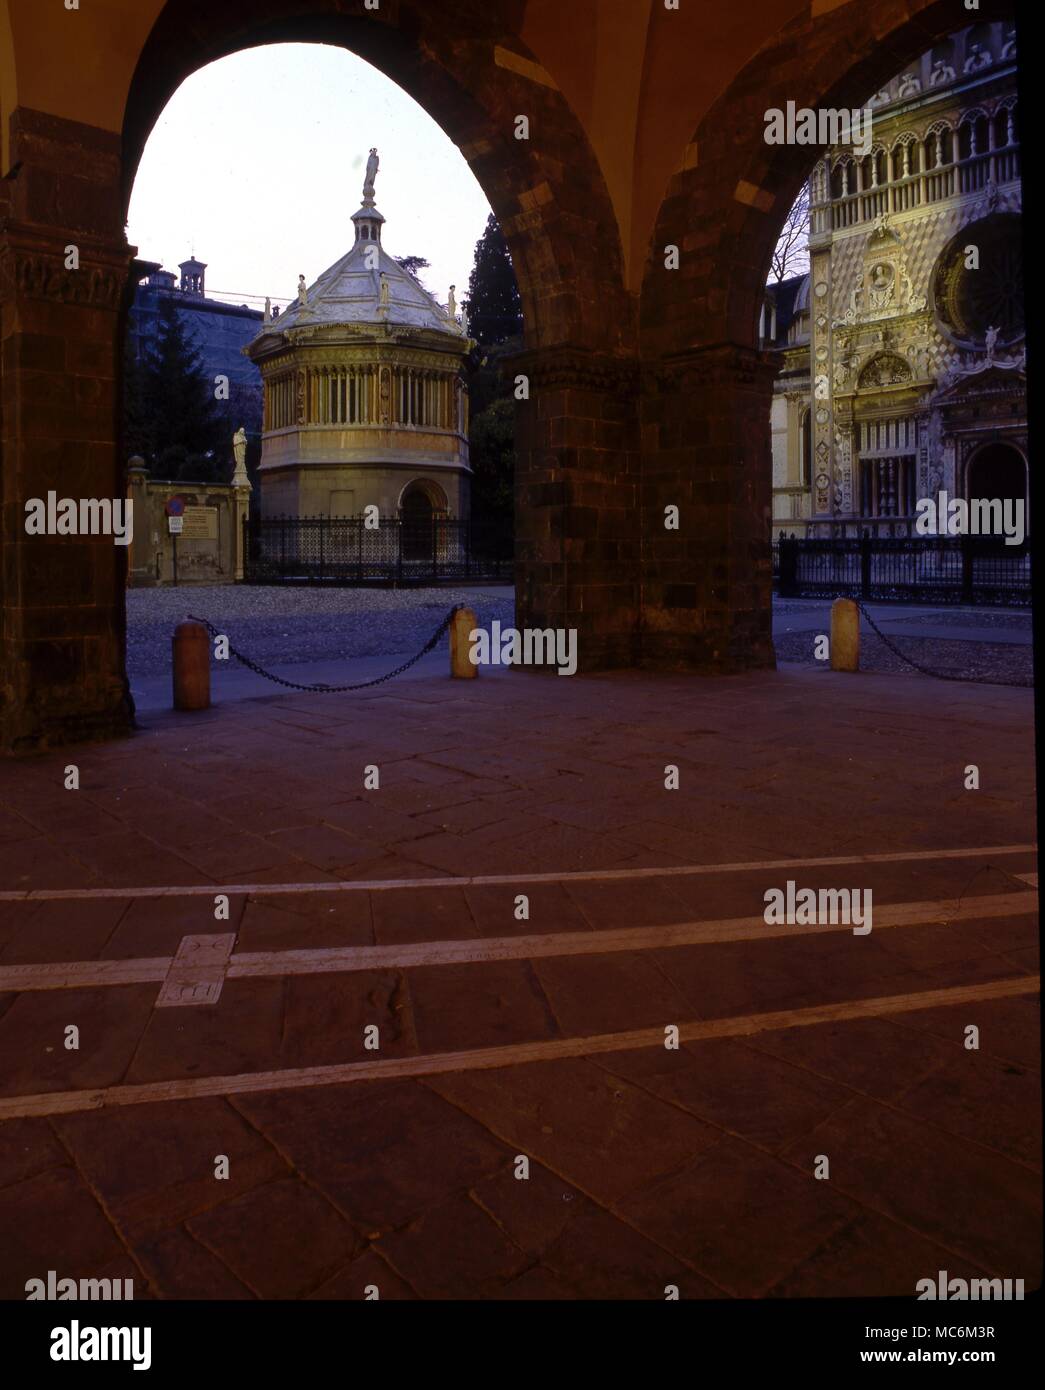 Light Mysteries. The horlogium, which receives the daily sun-marking of zodiacal position, under the old town hall of the Alta Citta, Bergamo, Italy. Through the arches are the baptistry and the cathedral. Stock Photo